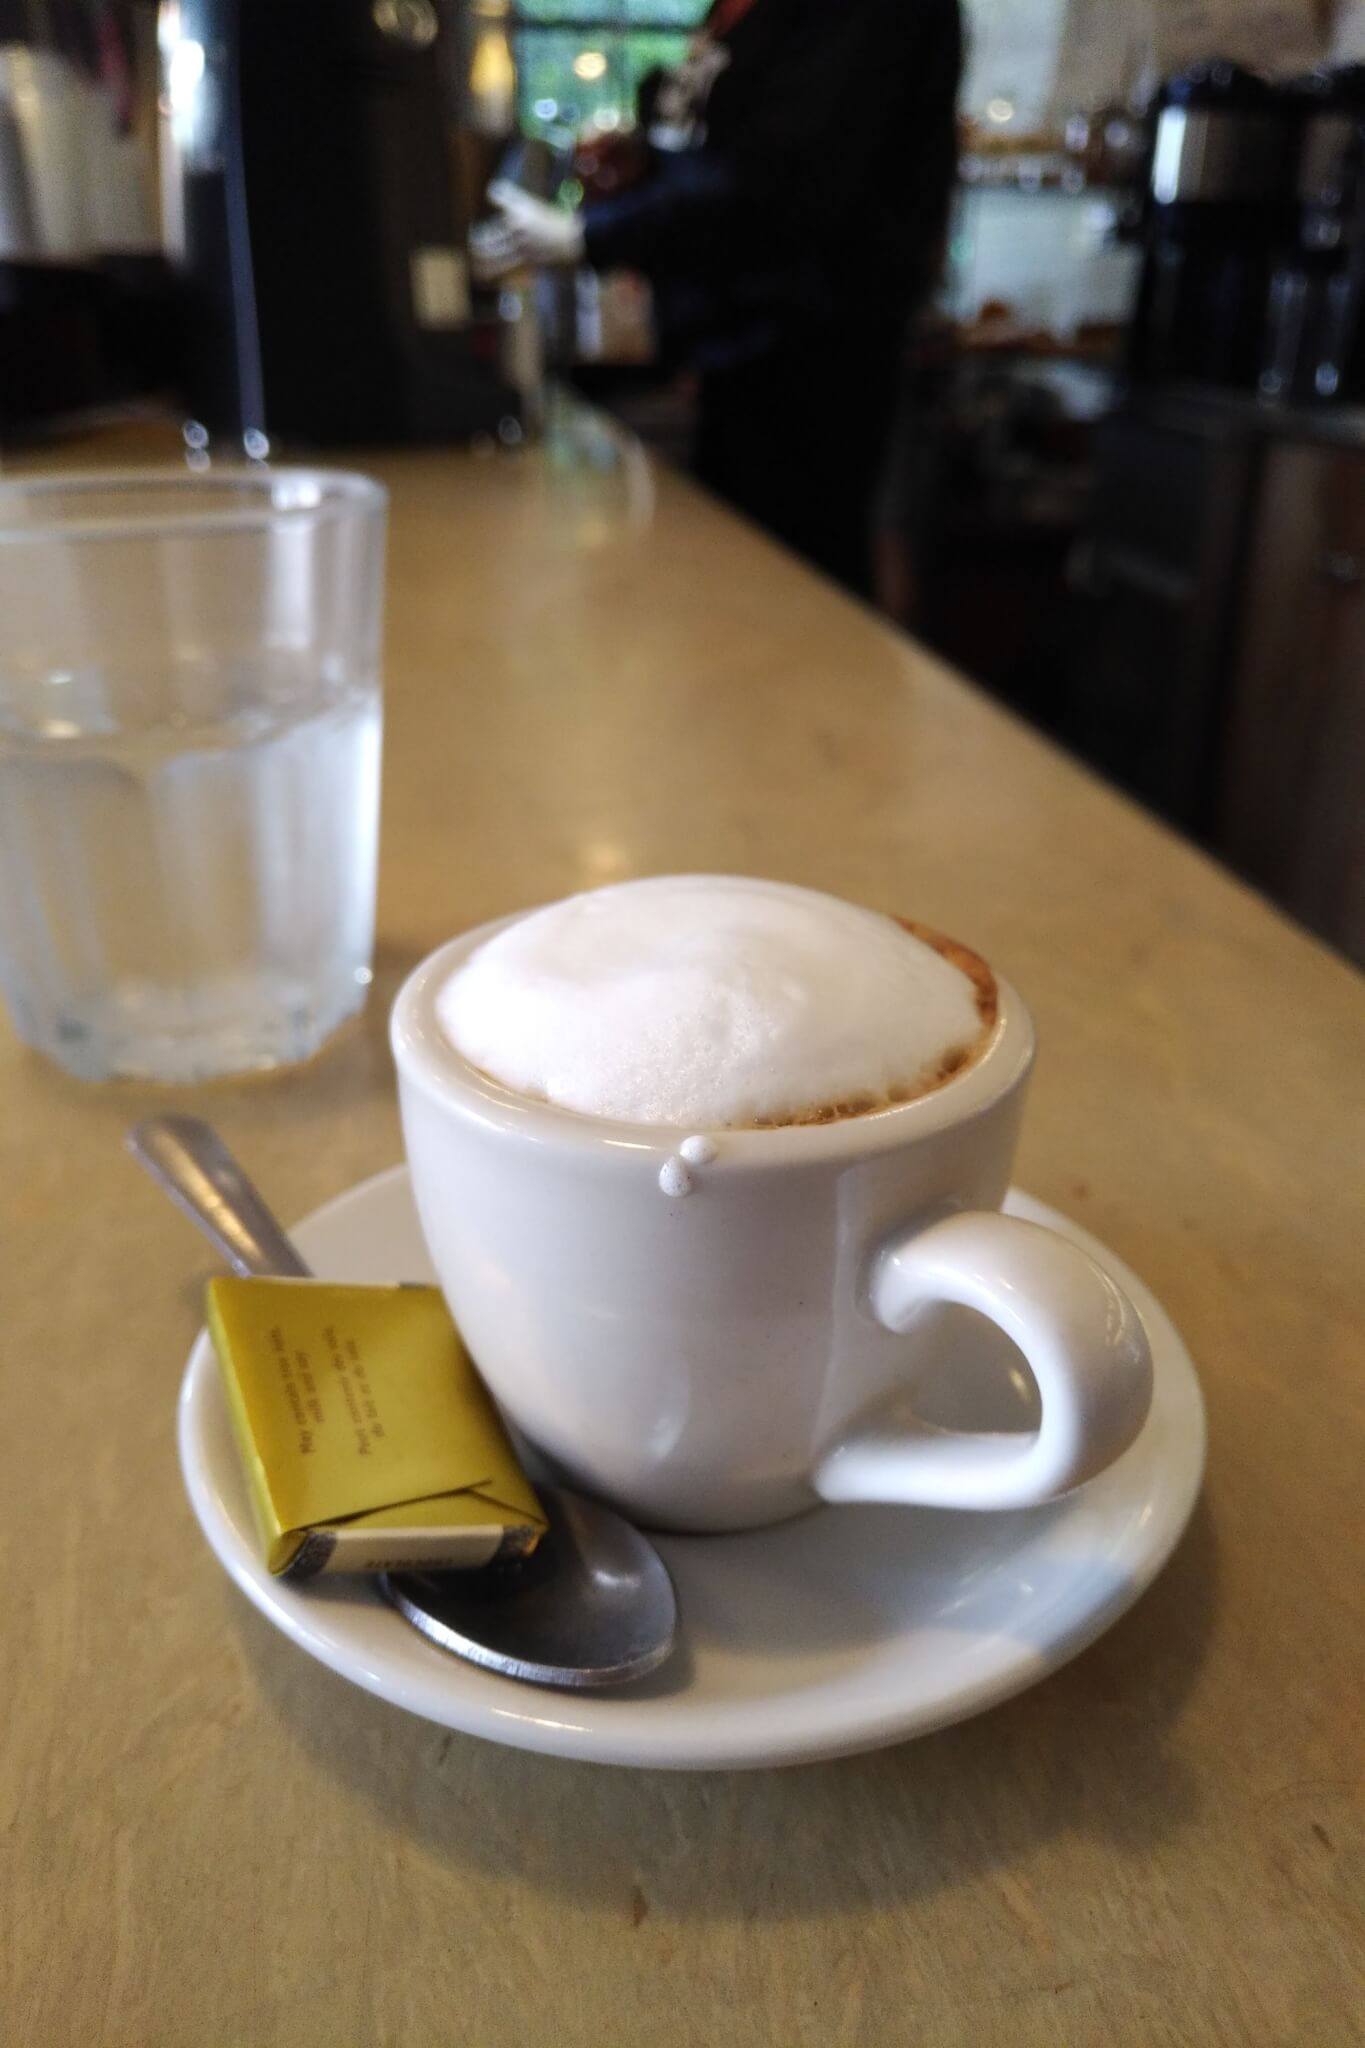 macchiato with a small foil-wrapped chocolate on the saucer